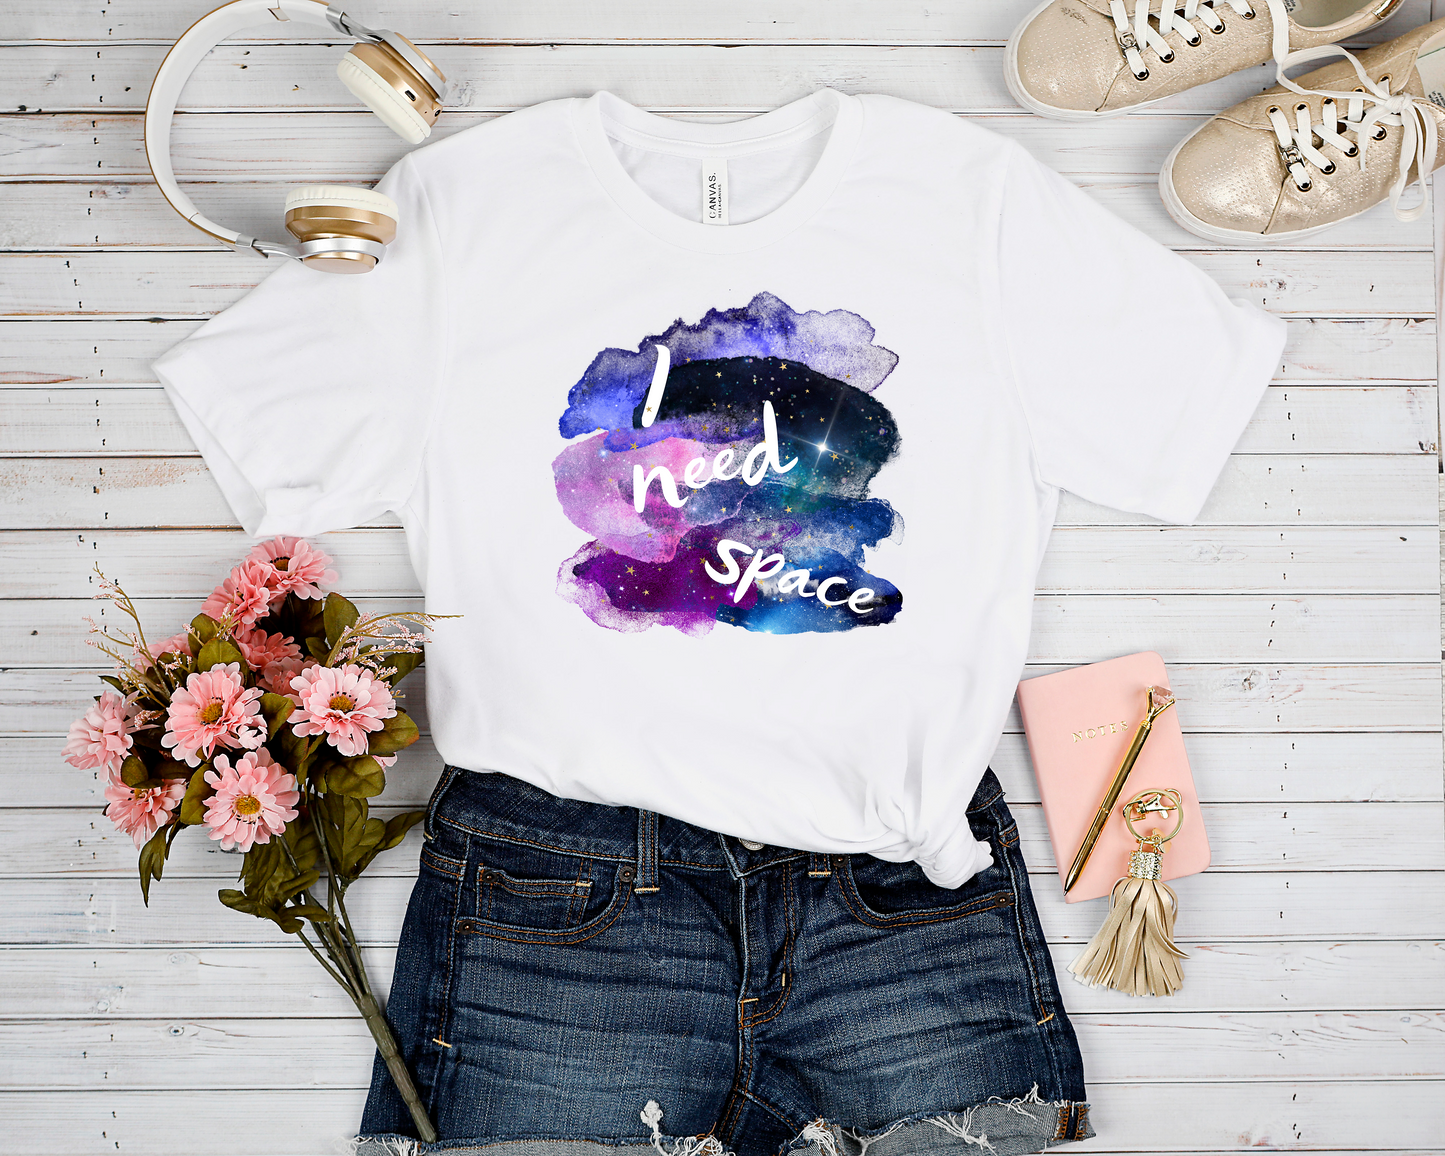 OUTFIT RUN 2- I NEED SPACE TEE